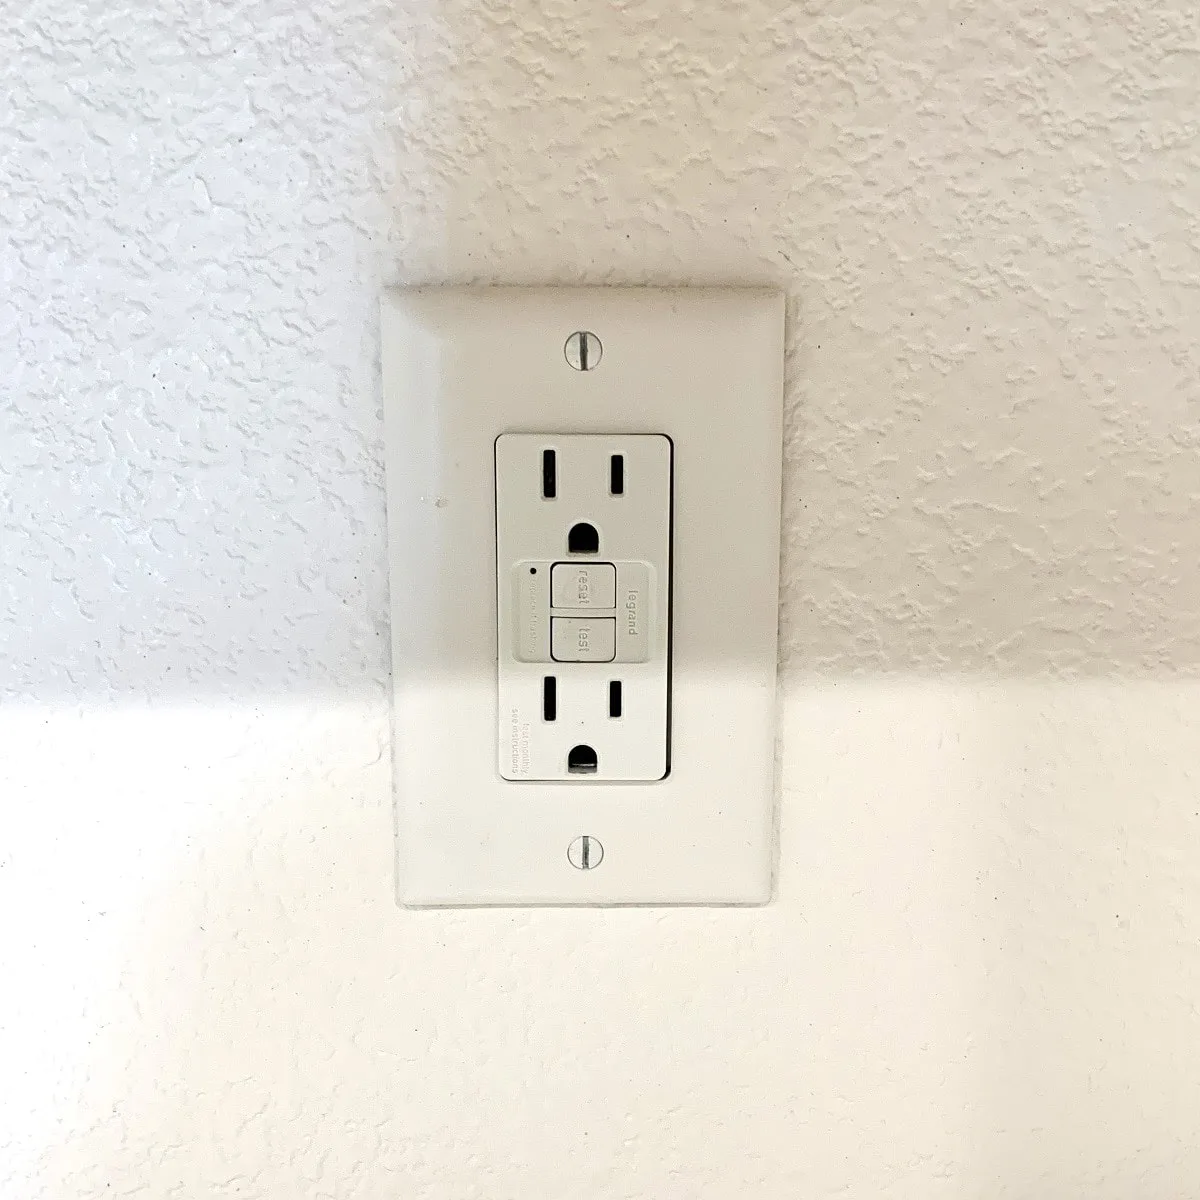 performed an outlets repair